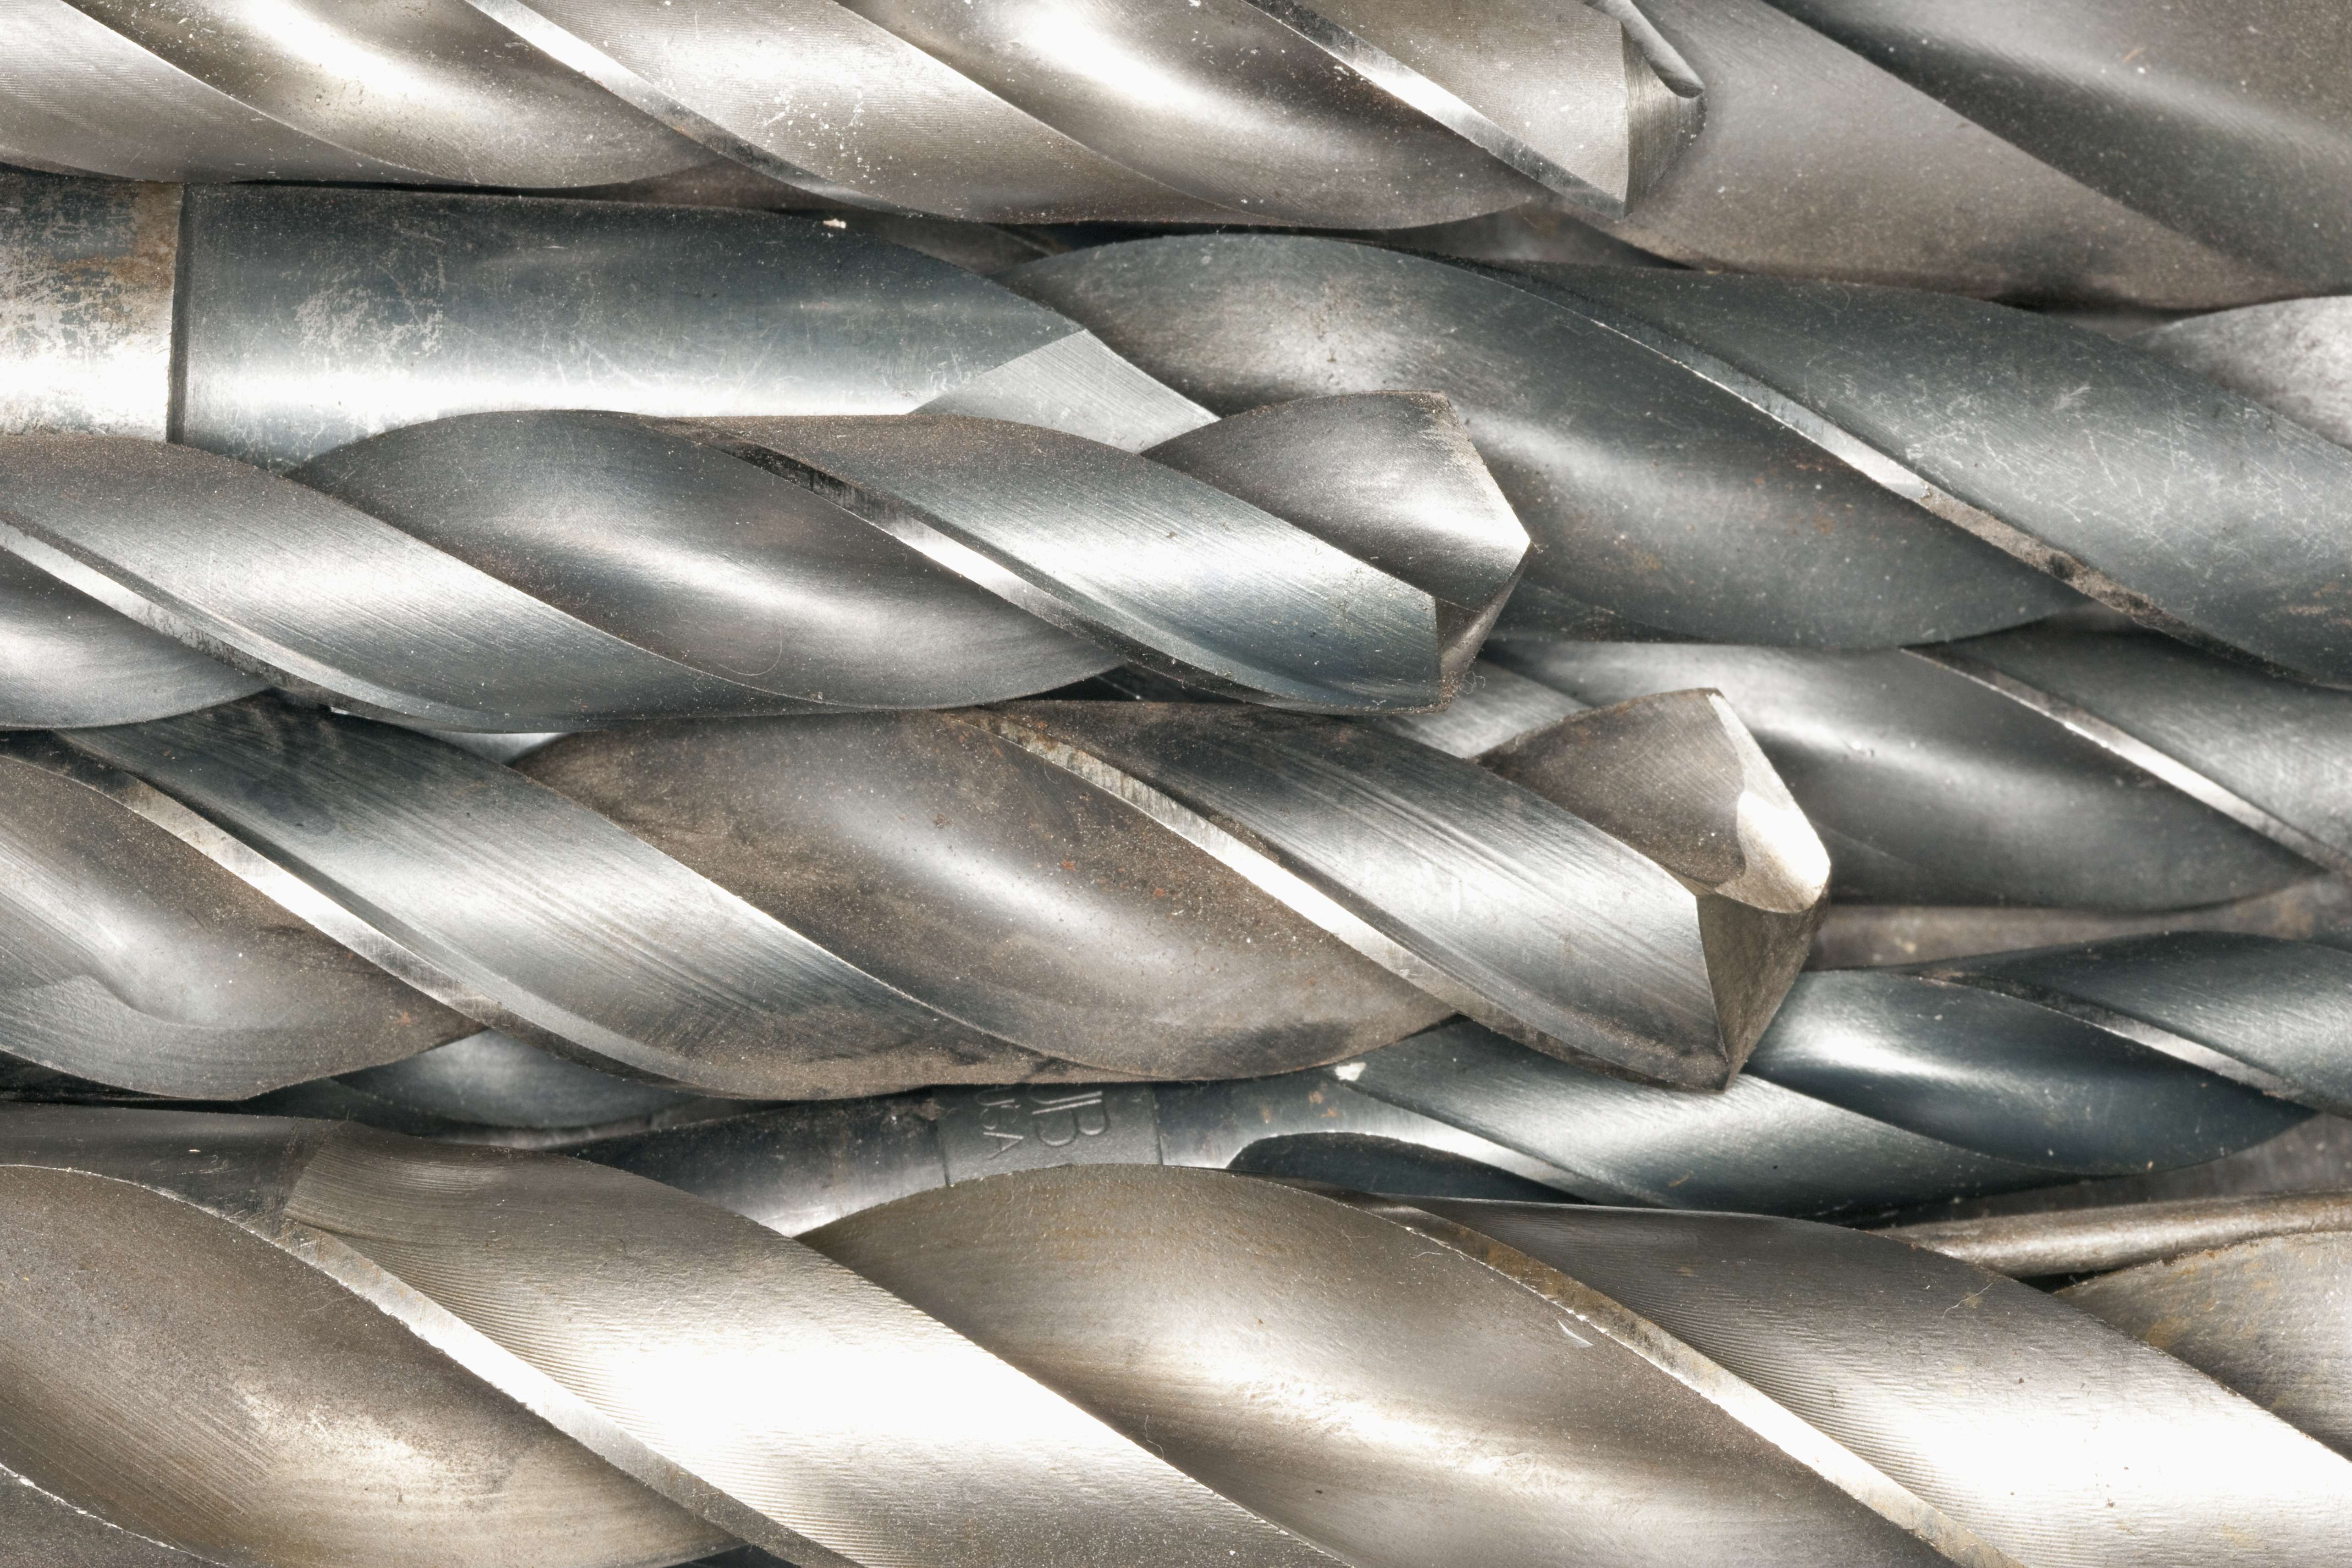 Metal Drill Bits, close up of grooved threads